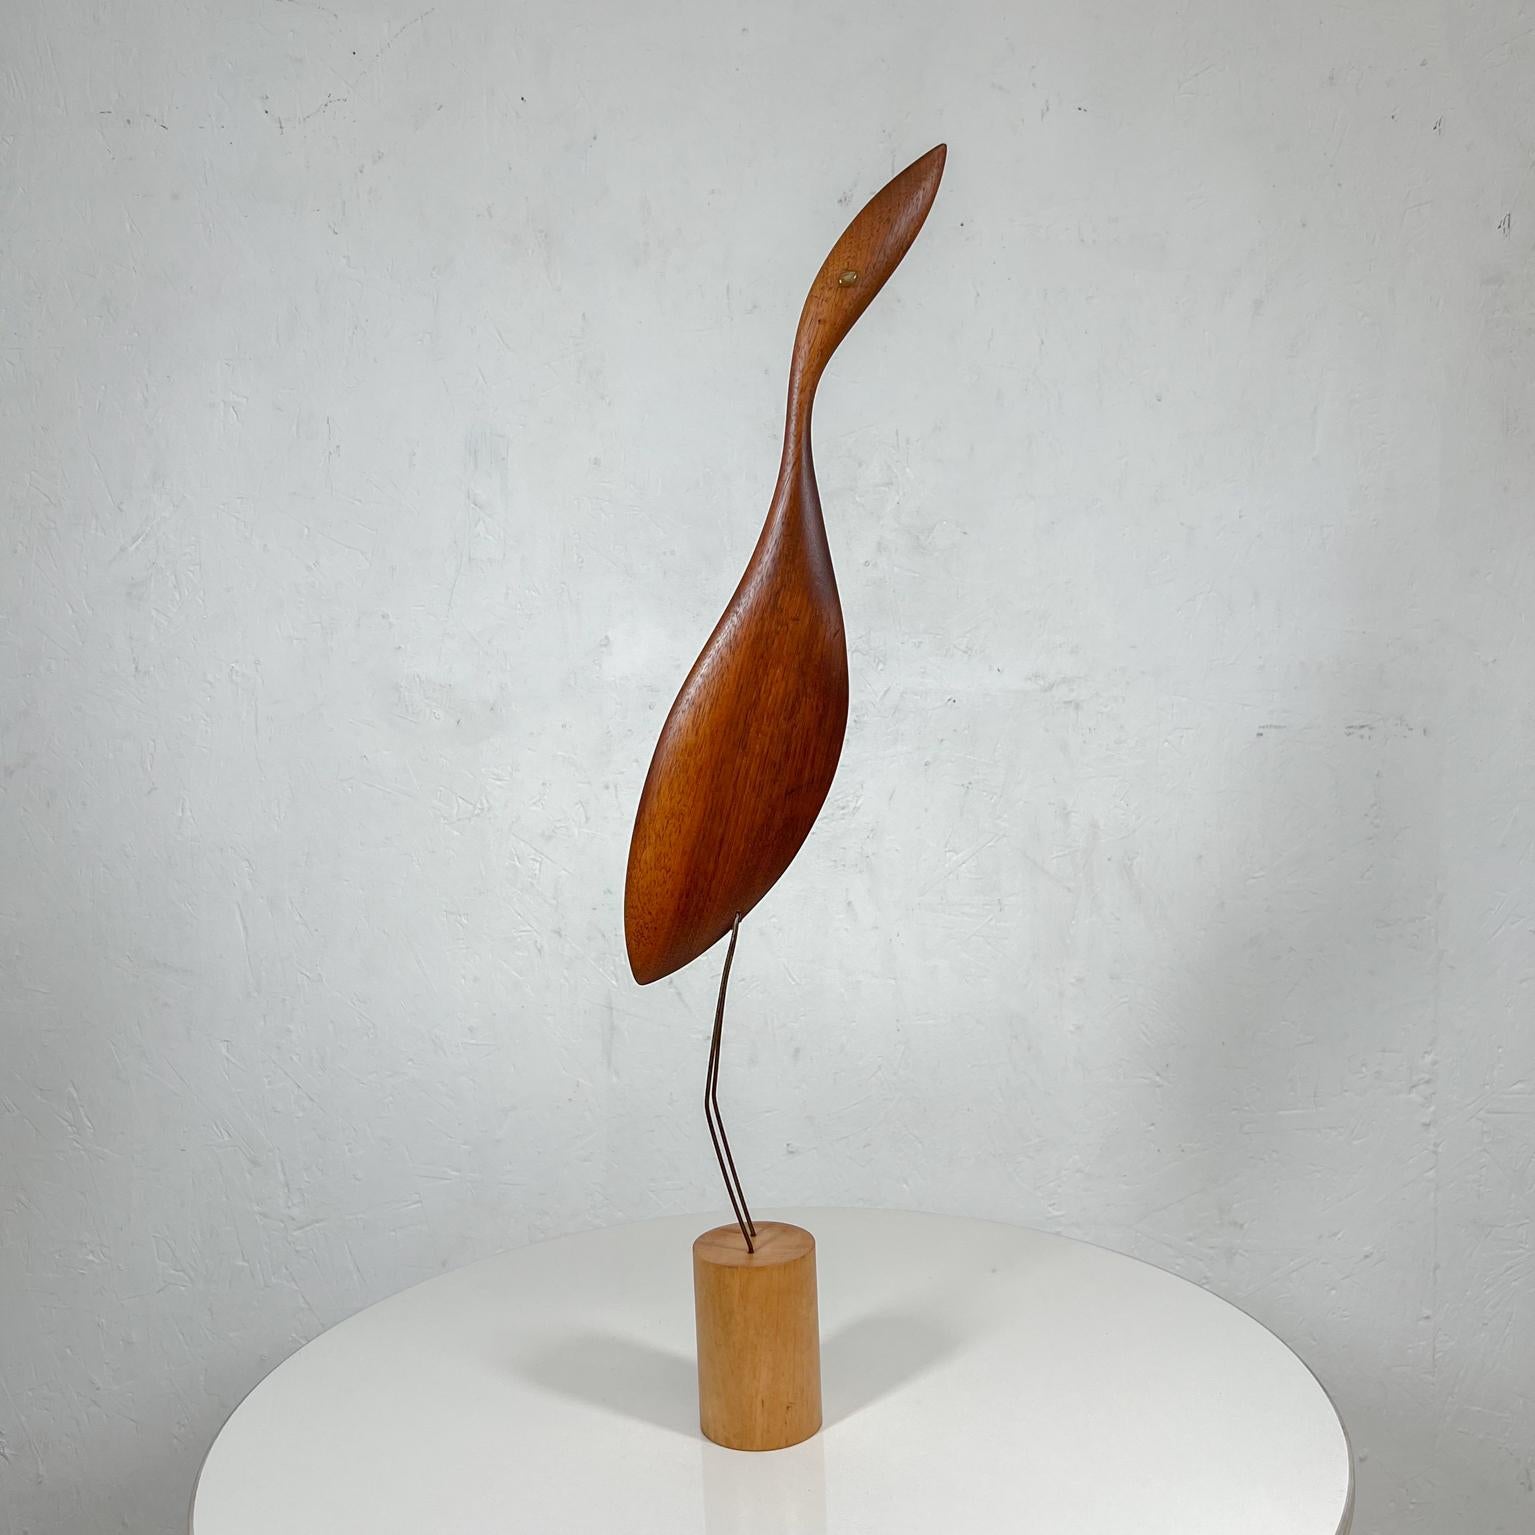 1960s Modern wood bird egret sculpture signed K & P.
Artist stamped.
Measures: 25.25 tall x 4 deep x 2.5 diameter base.
Preowned vintage condition unrestored.
See images provided.





